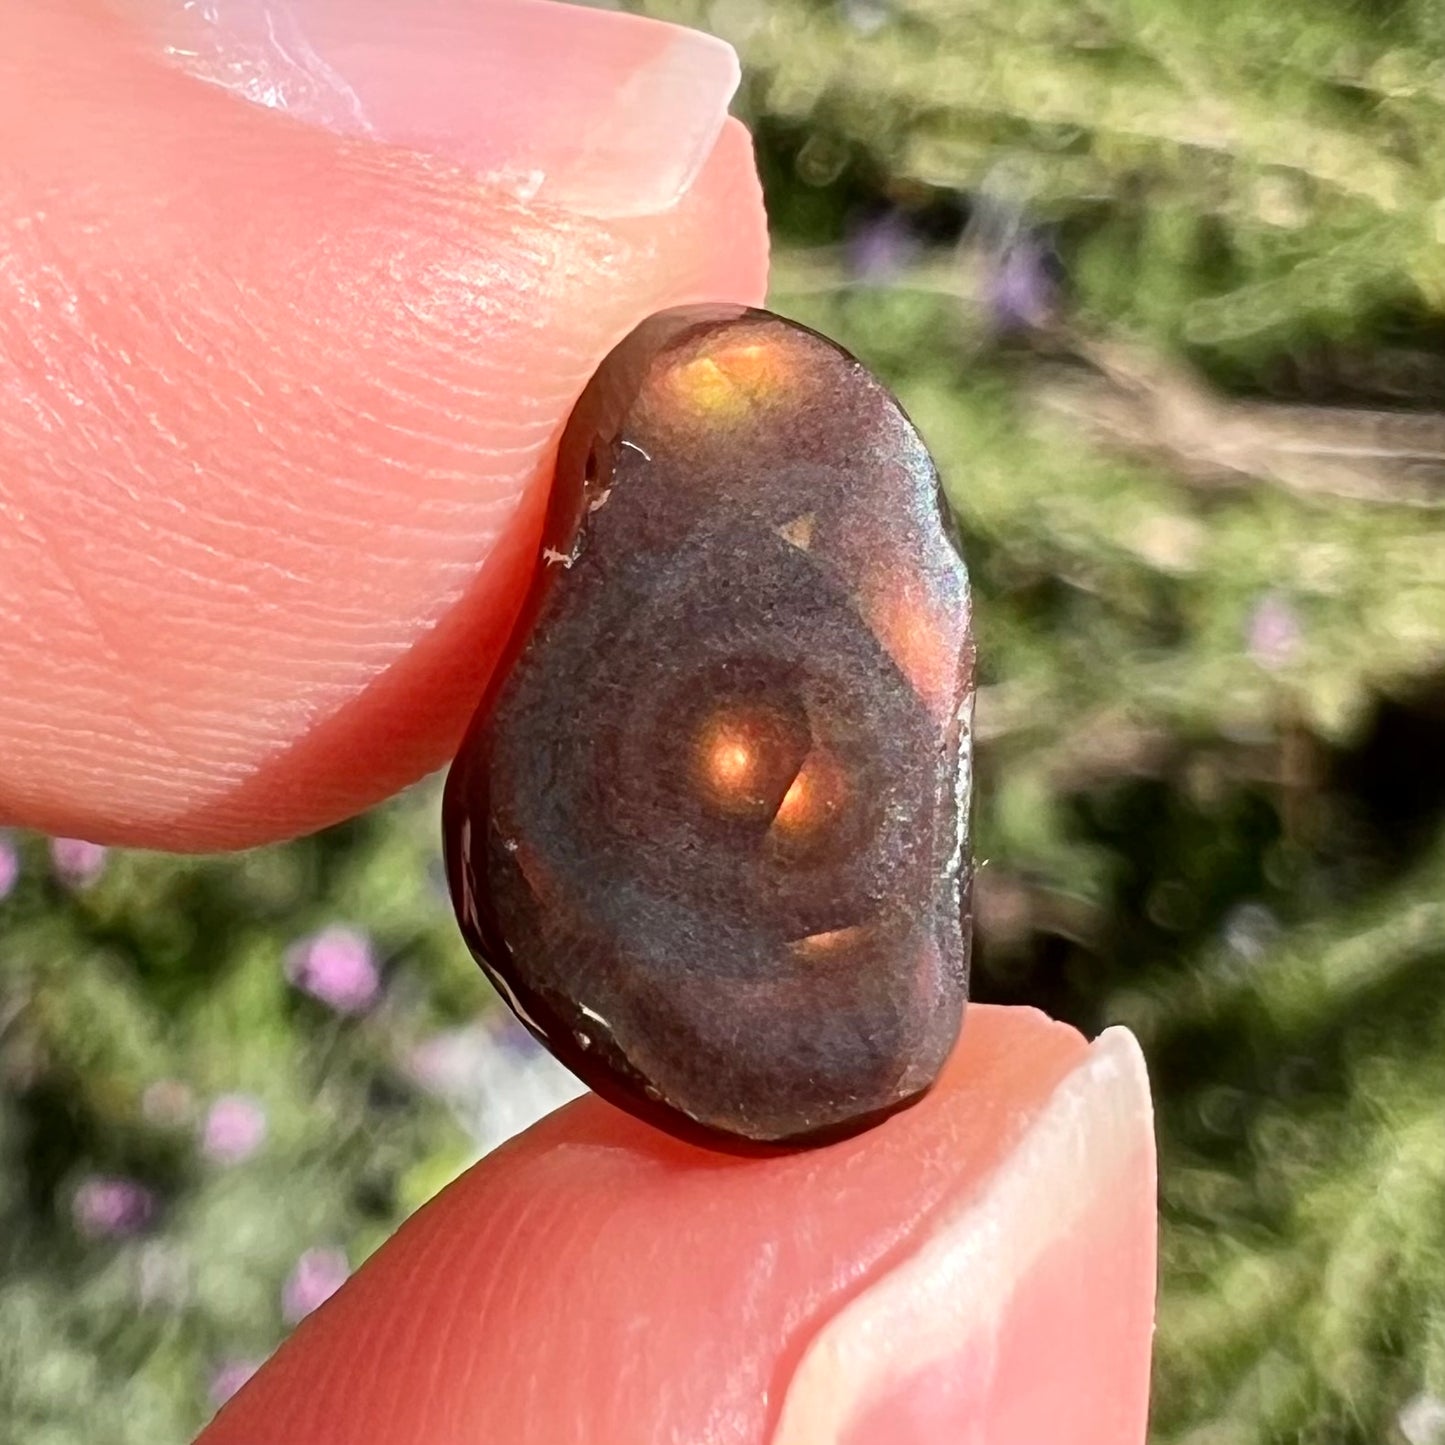 A loose, imperial grade Mexican fire agate gemstone.  The stone has a bull's eye pattern.